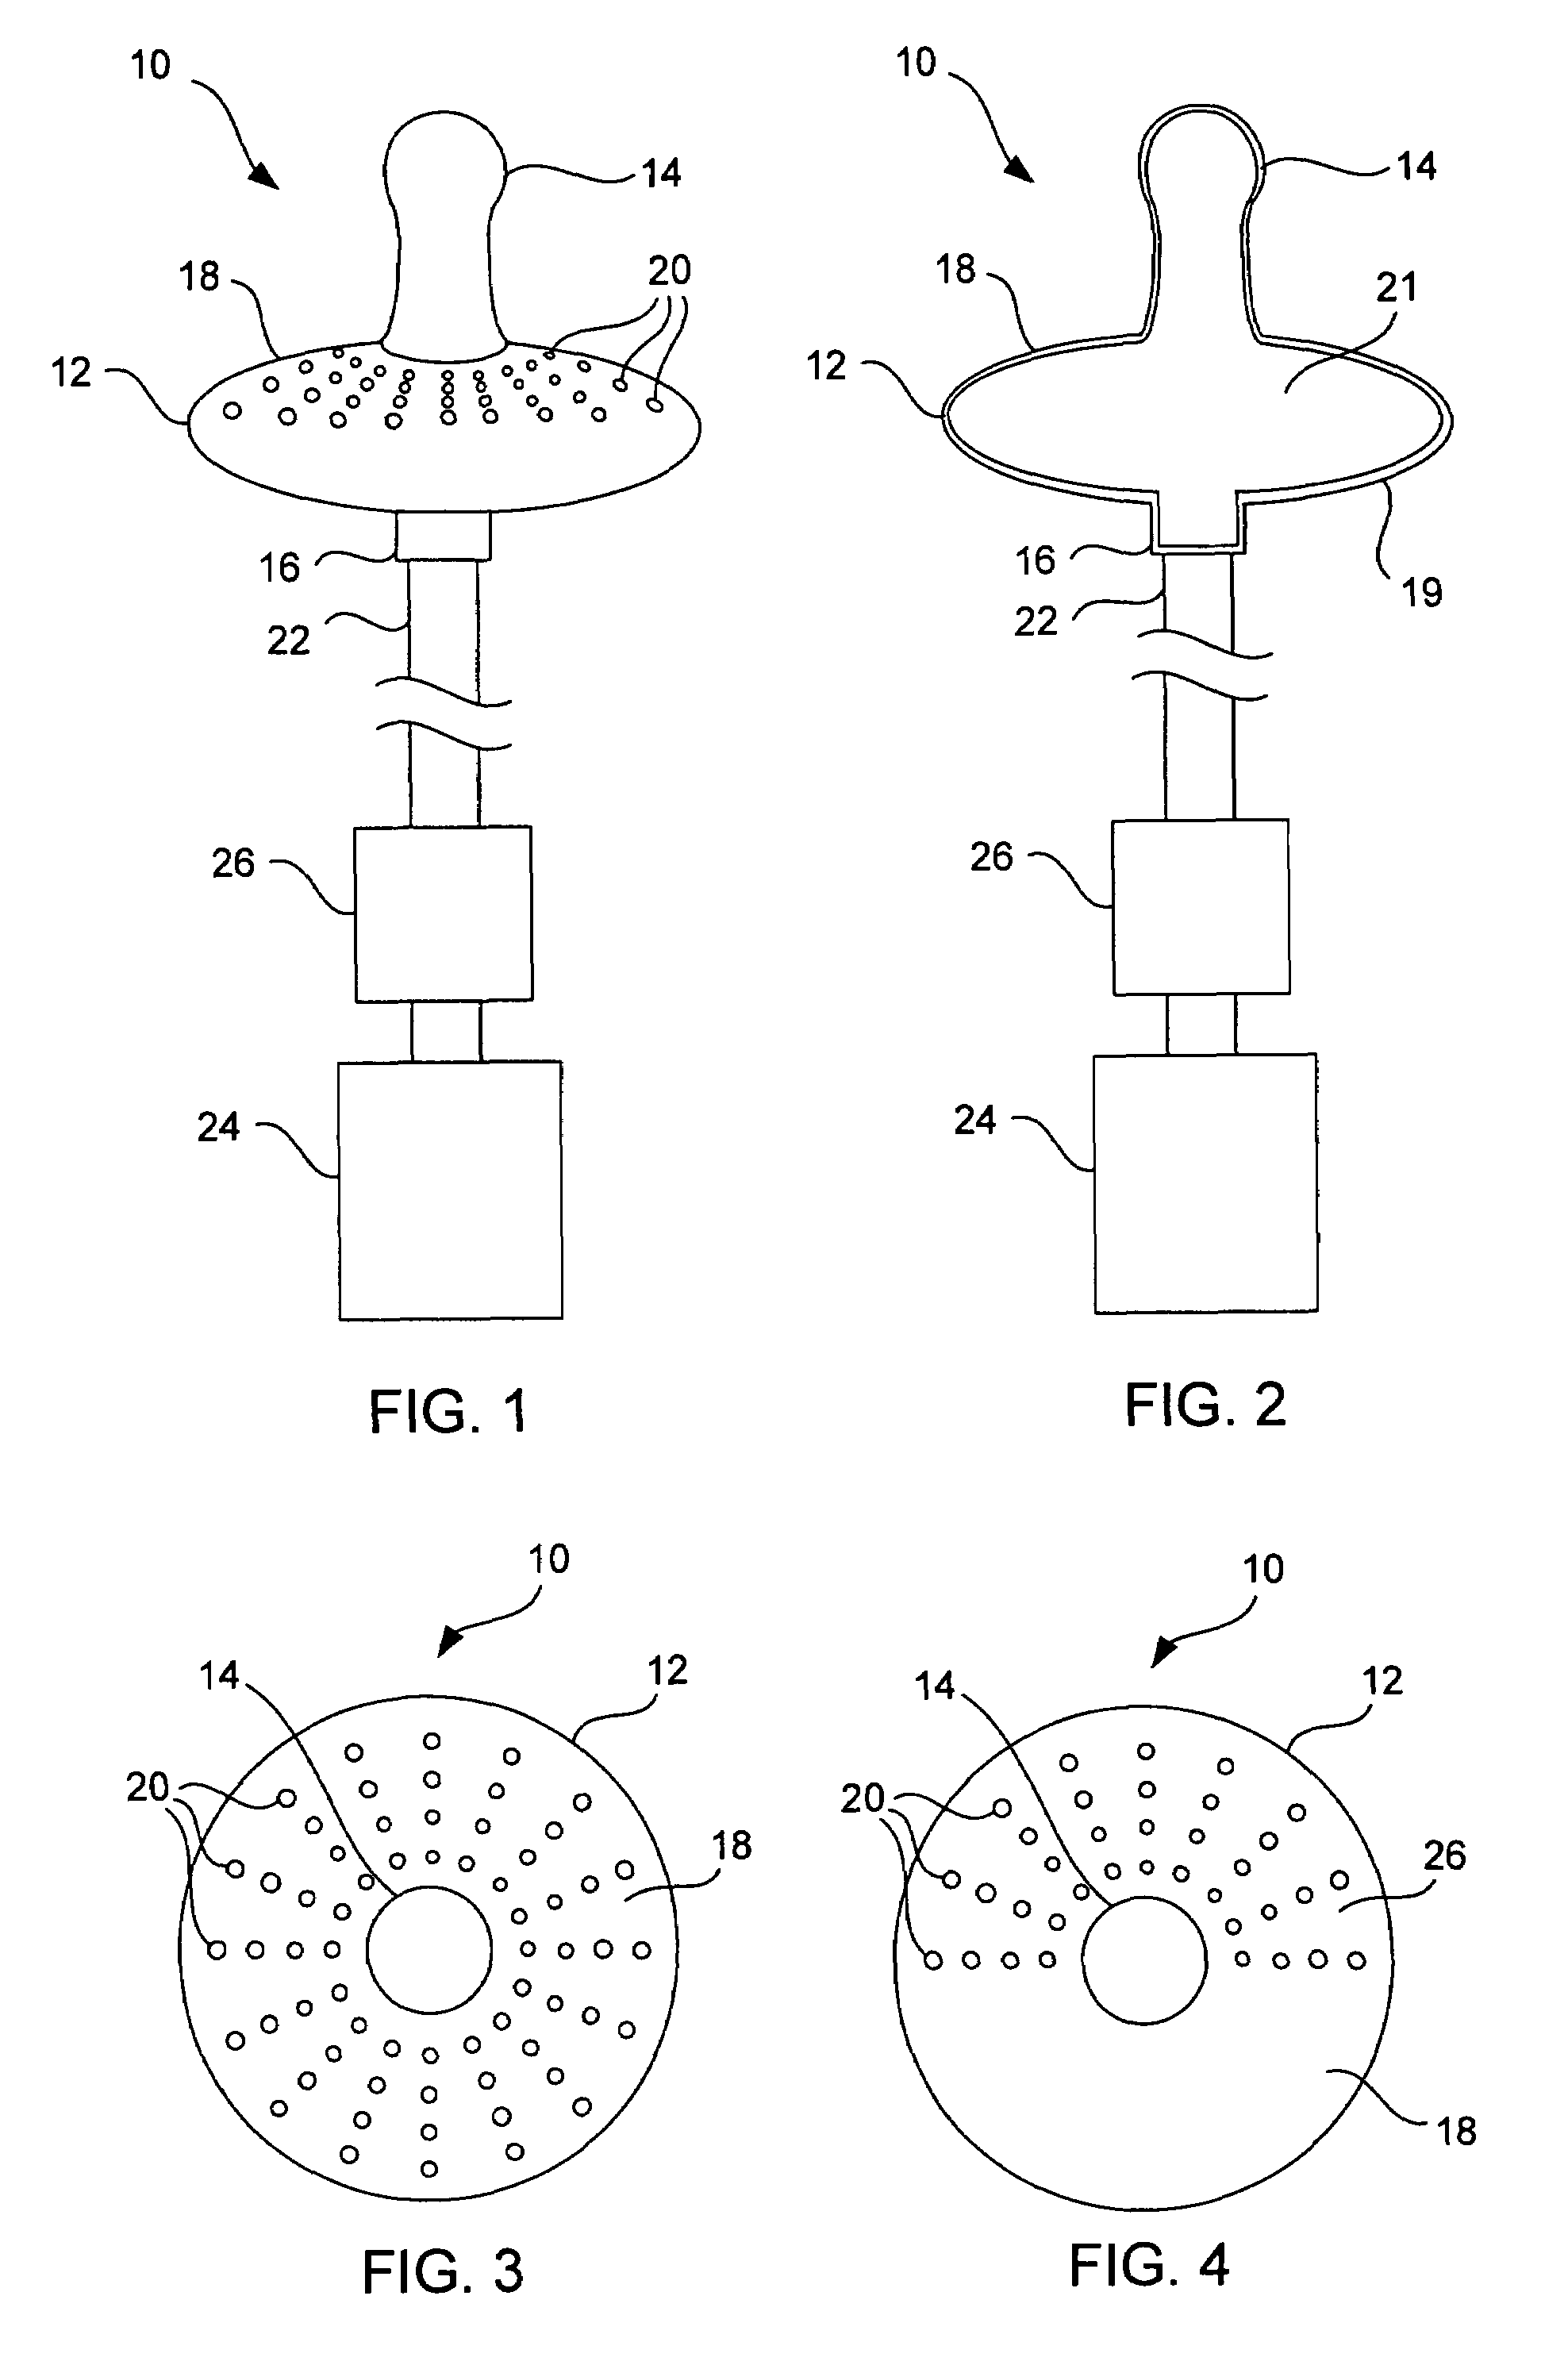 Gas delivery device for infants